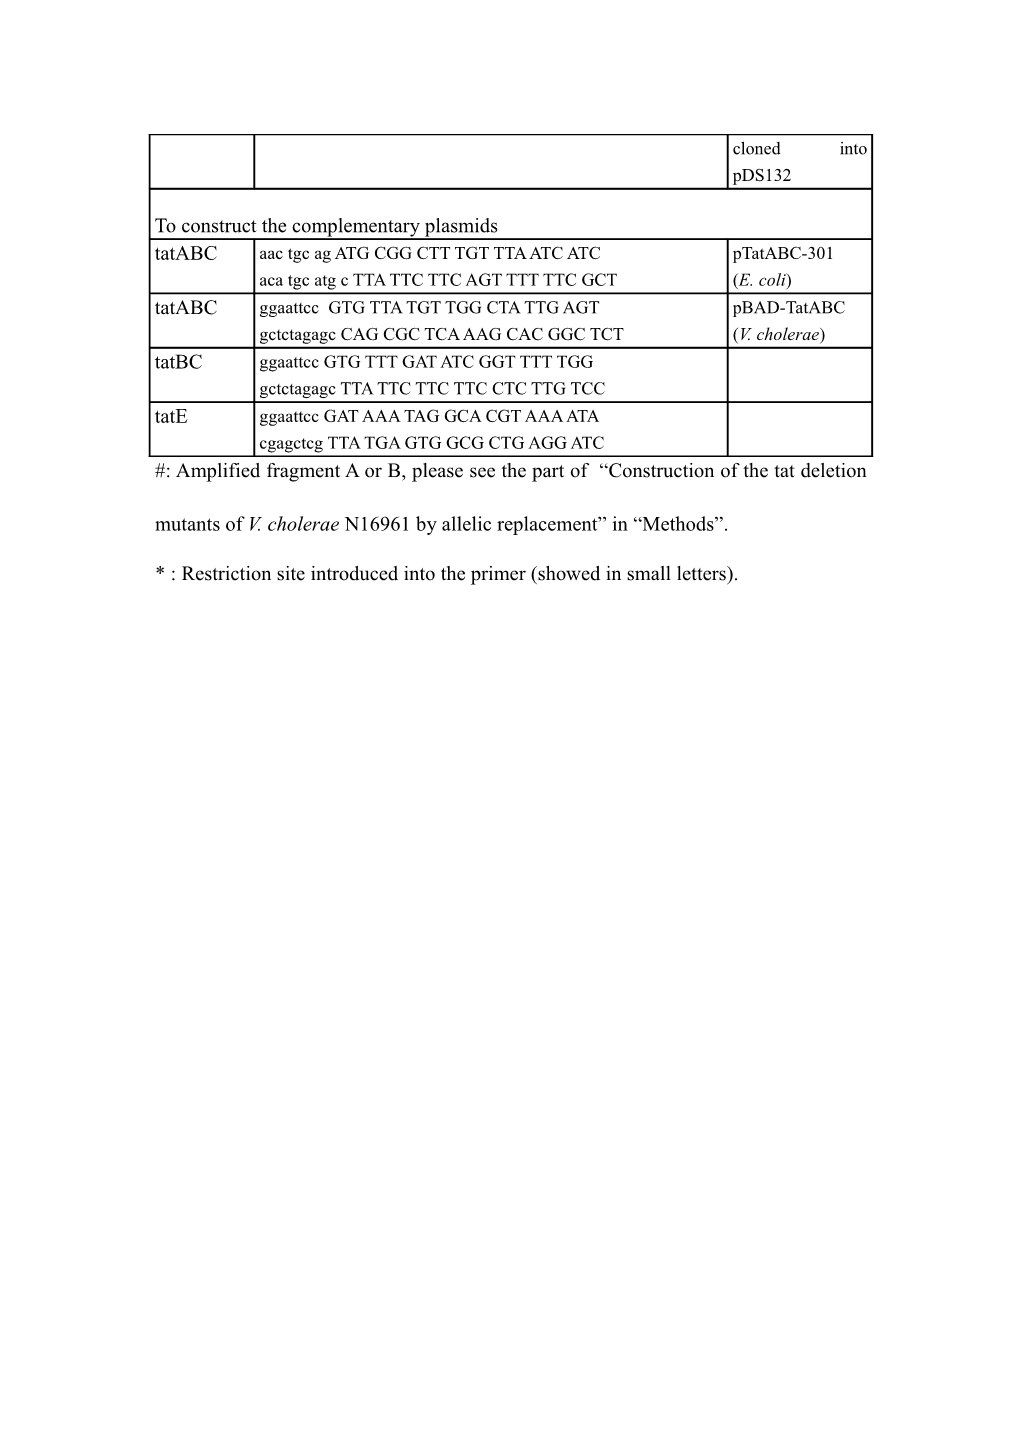 Table. Primers Used to Construct the Recombinant Plasmids and Mutants of Tat Genes